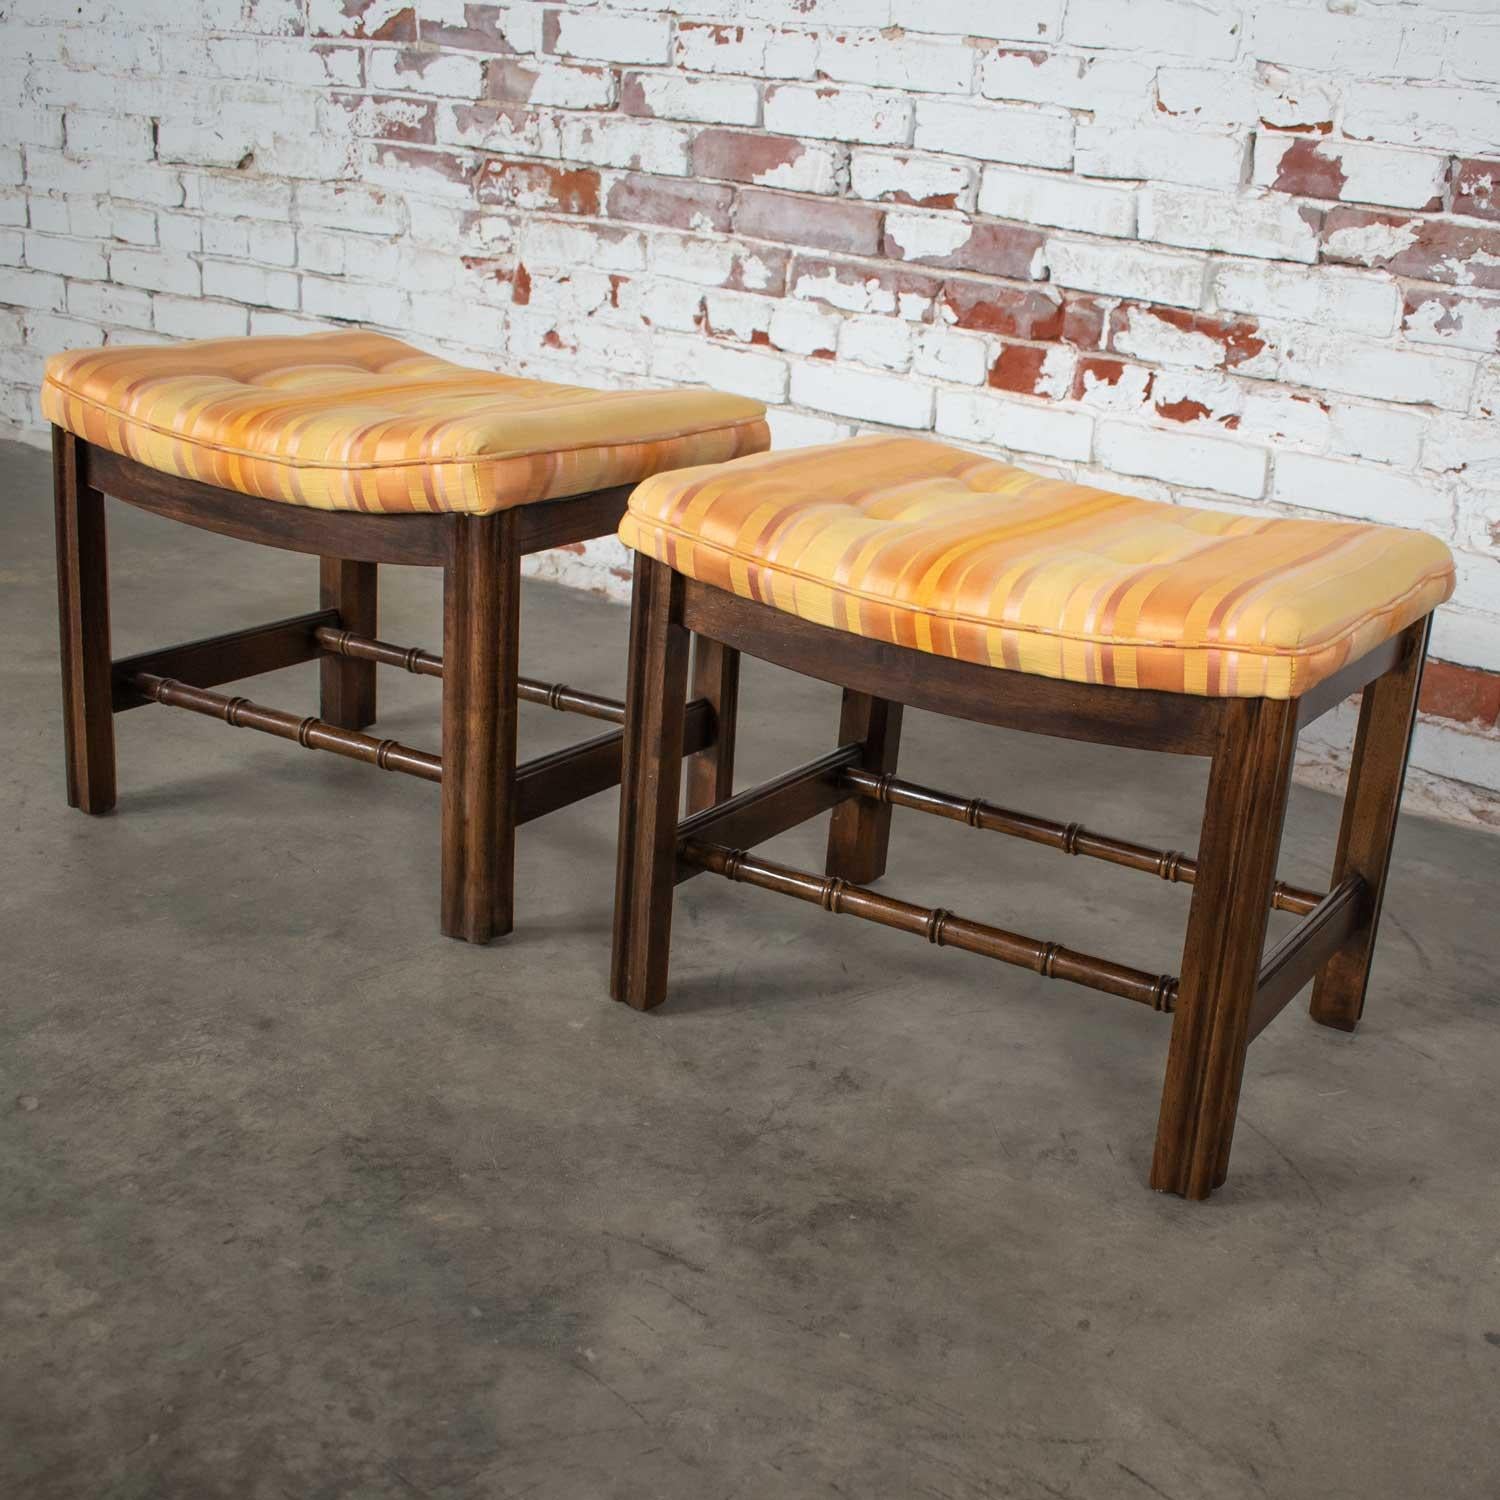 Chinese Chippendale Pair of Foot Stools in Orange and Yellow Stripe Upholstery 1